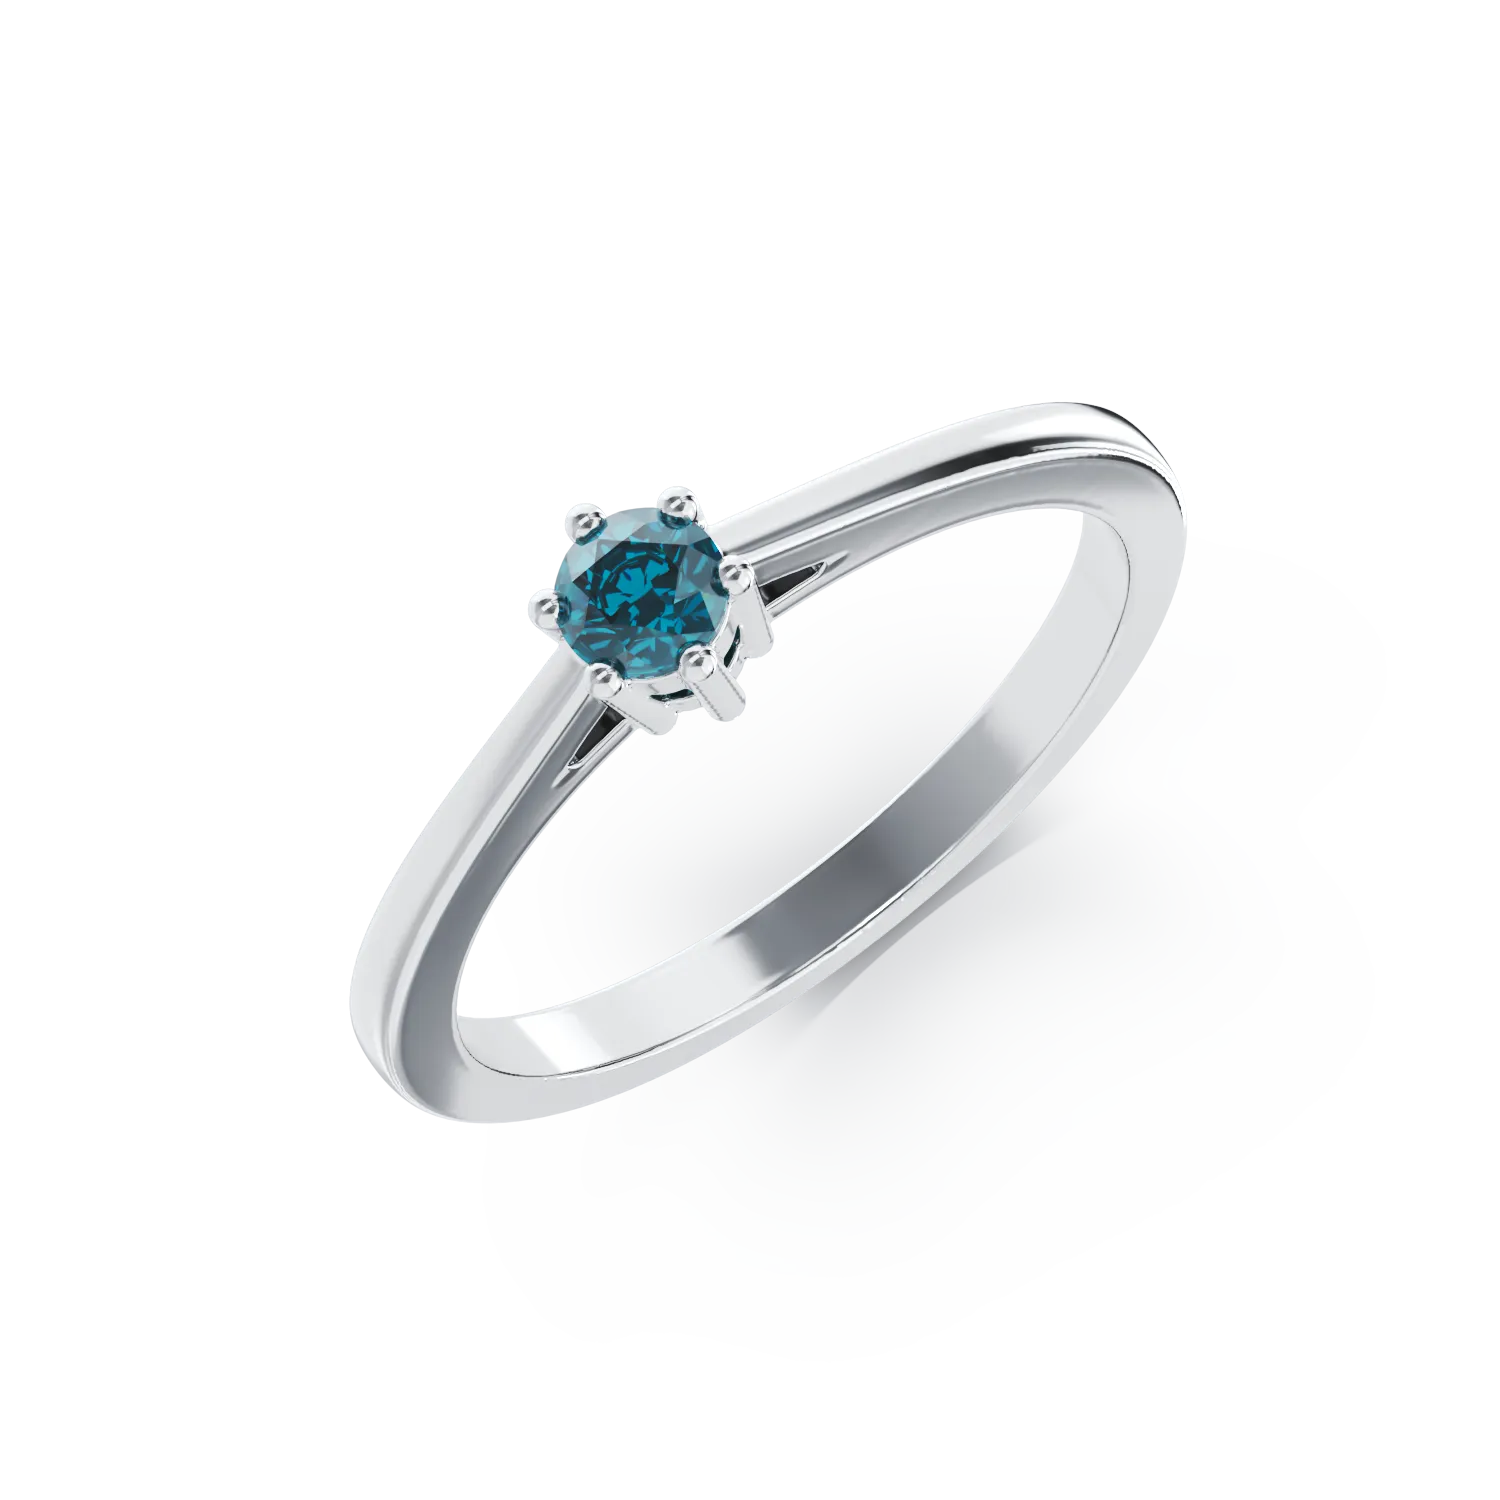 18K white gold engagement ring with 0.31ct blue diamond